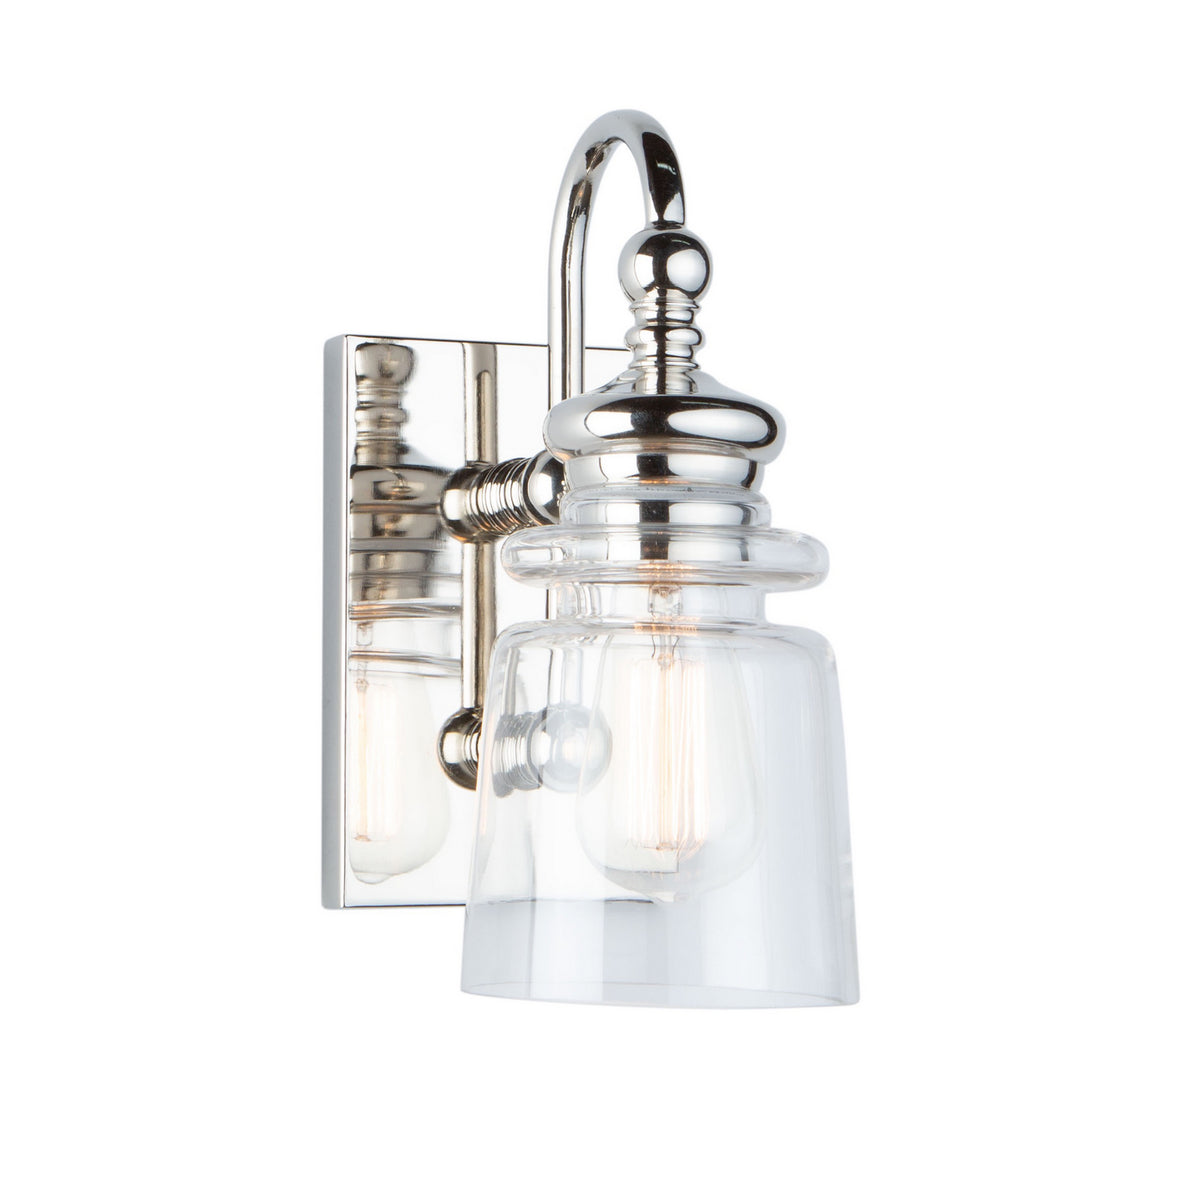 Artcraft One Light Wall Sconce from the Castara collection in Polished Nickel finish